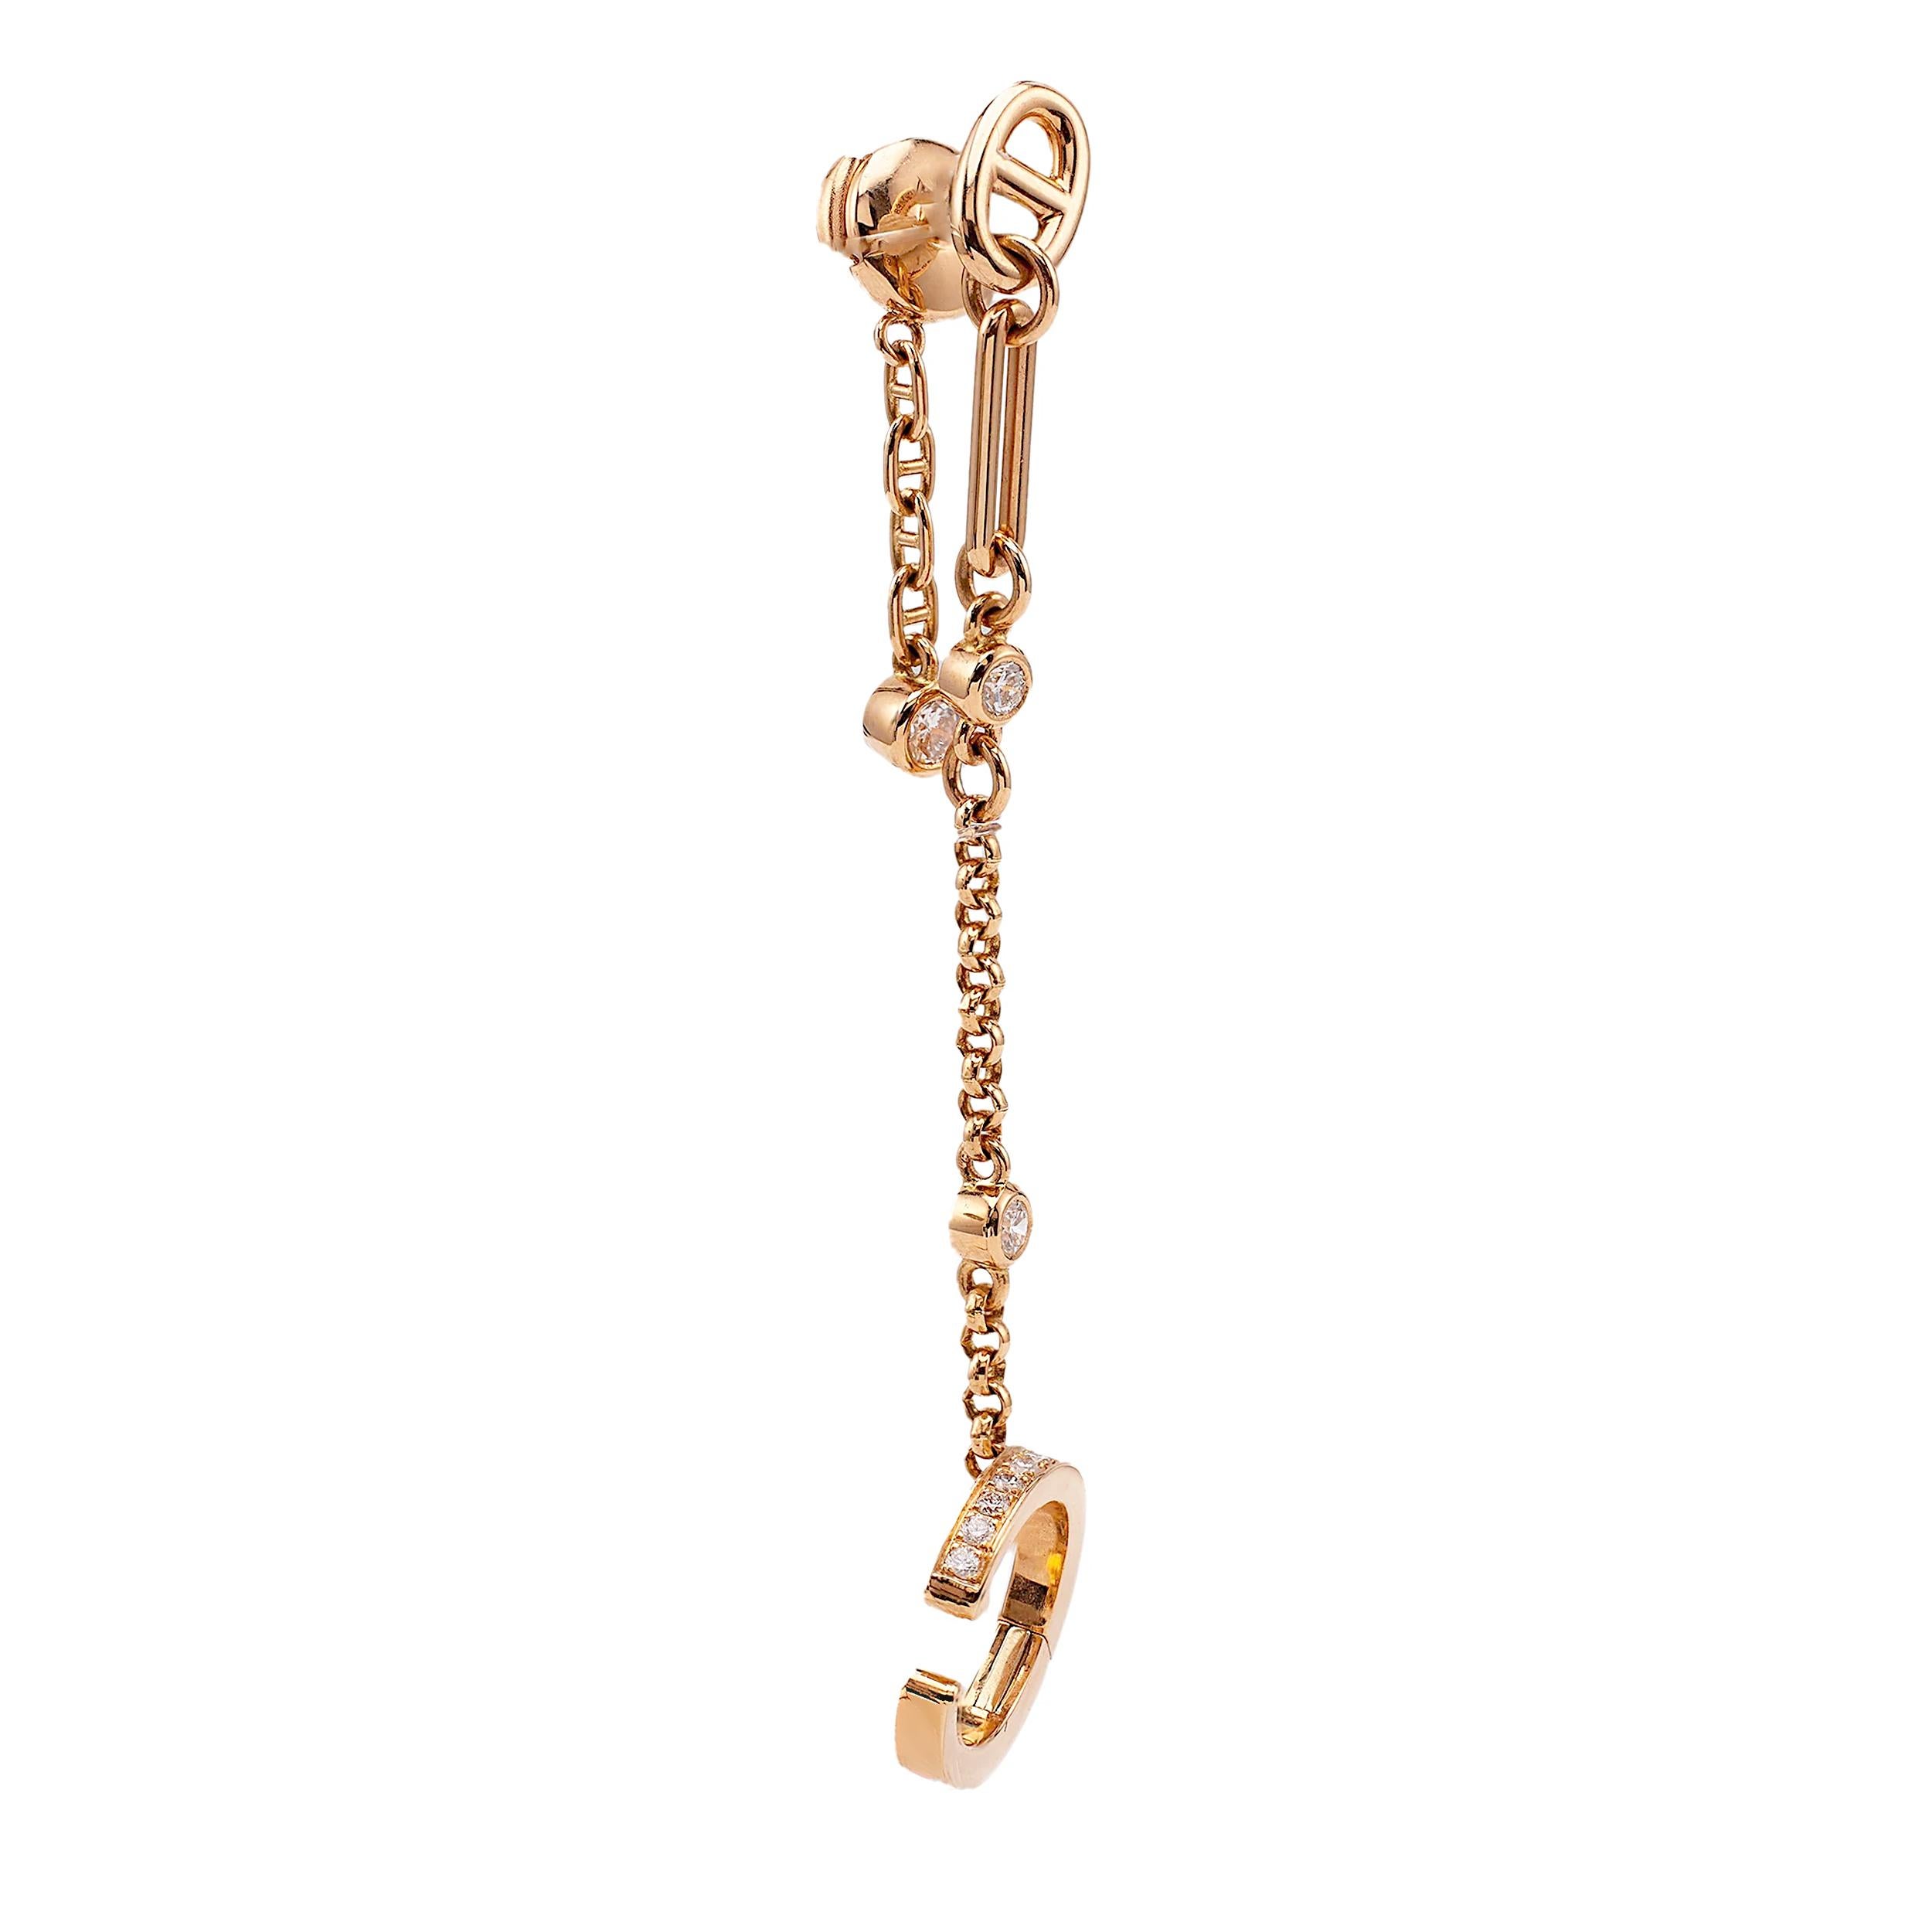 Introducing the Hermès Chaine D'Ancre Rose Gold Diamond Chaos Right Single Earring Cuff, a masterpiece of design and craftsmanship that combines the essence of luxury with a touch of rebellion. Crafted from the finest 18k rose gold, this earring